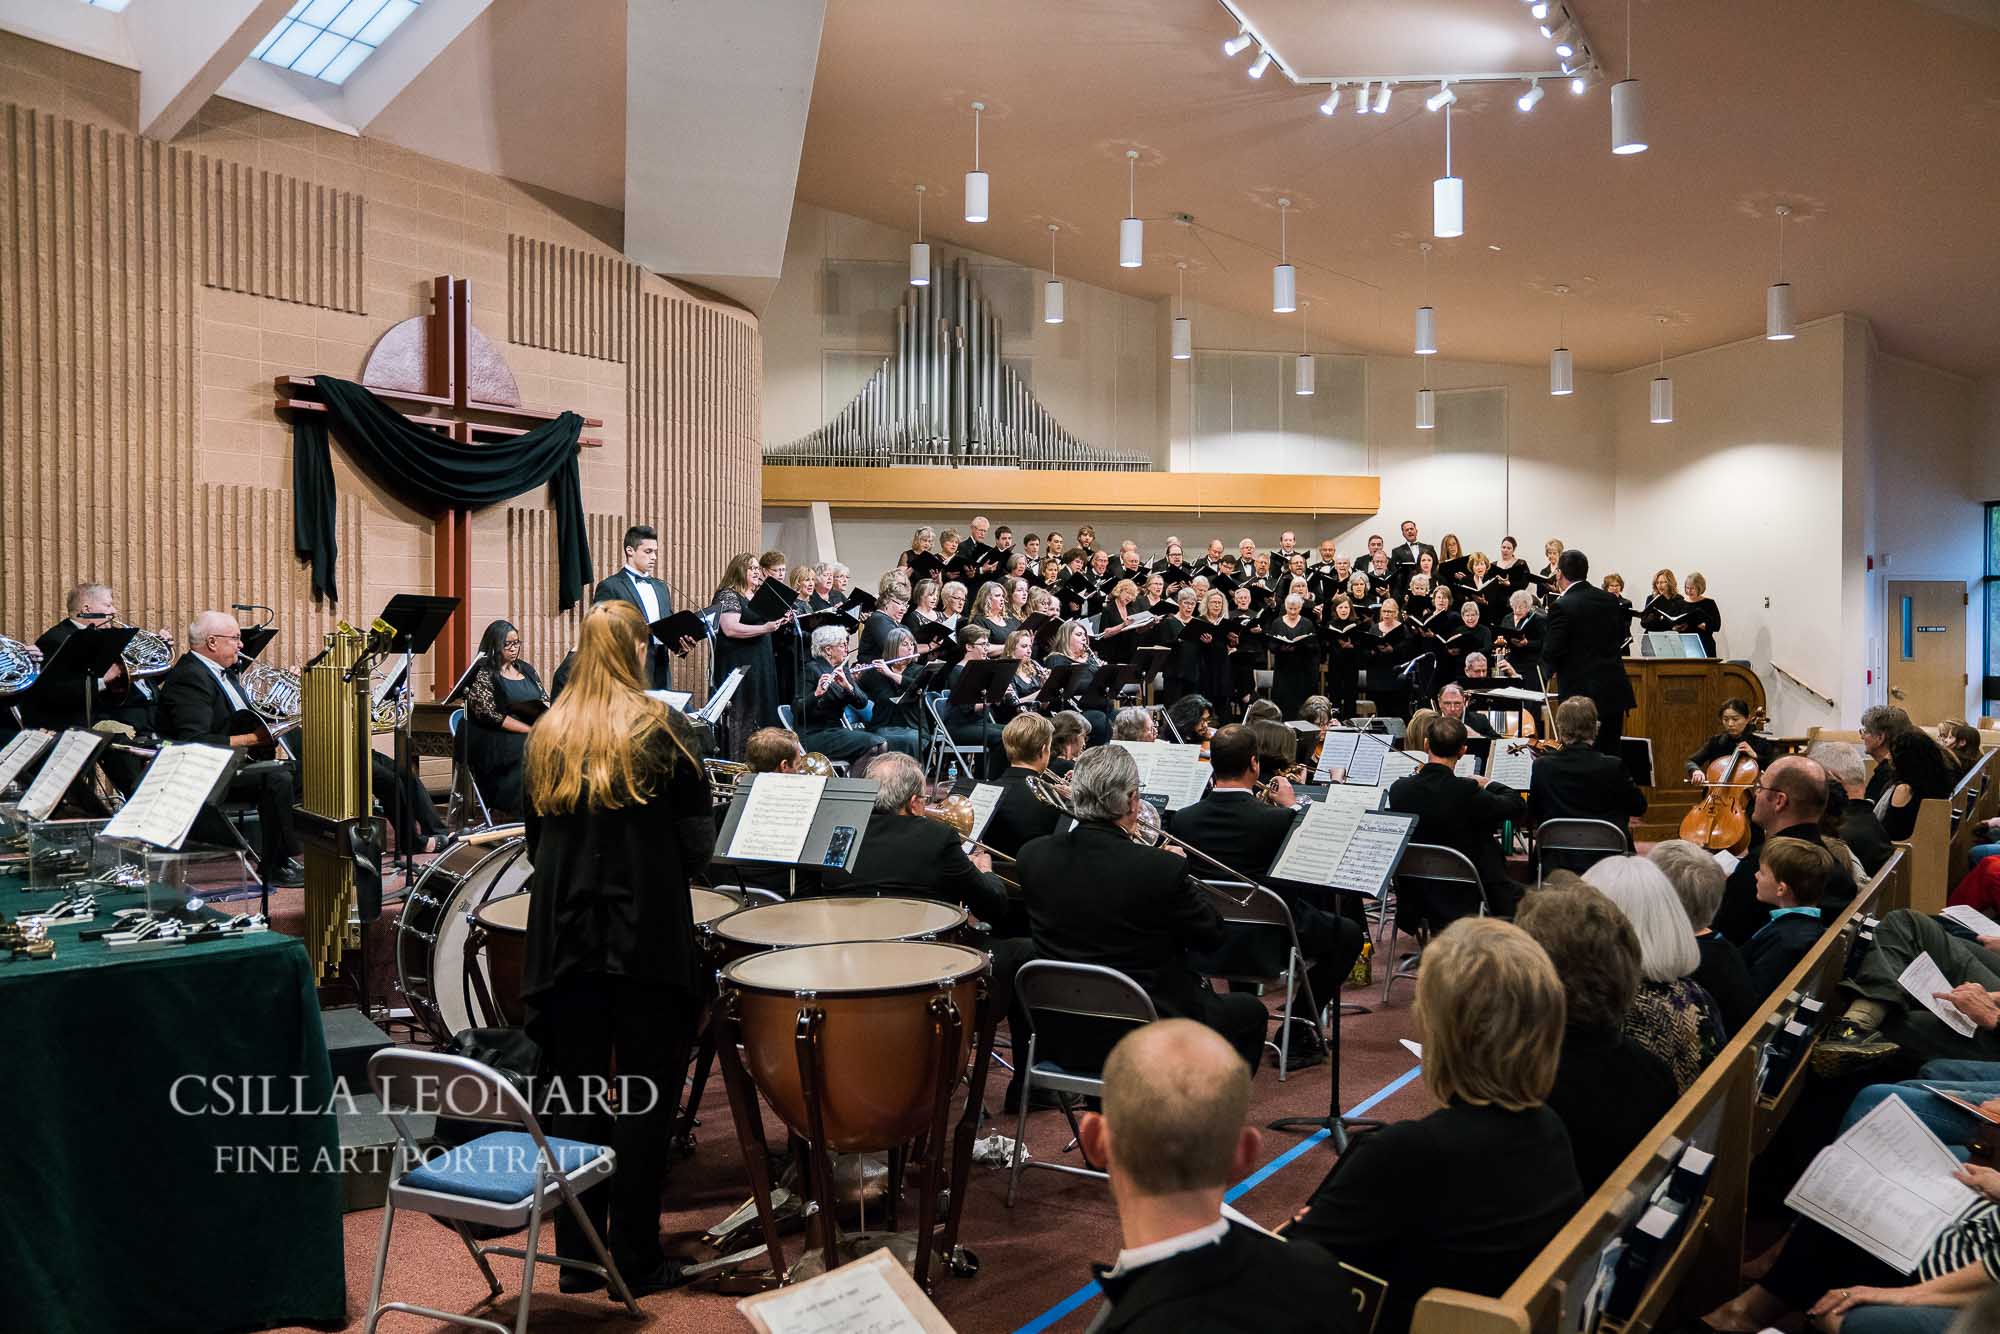 Grand junction photographer shows images of Good Friday concert (3)